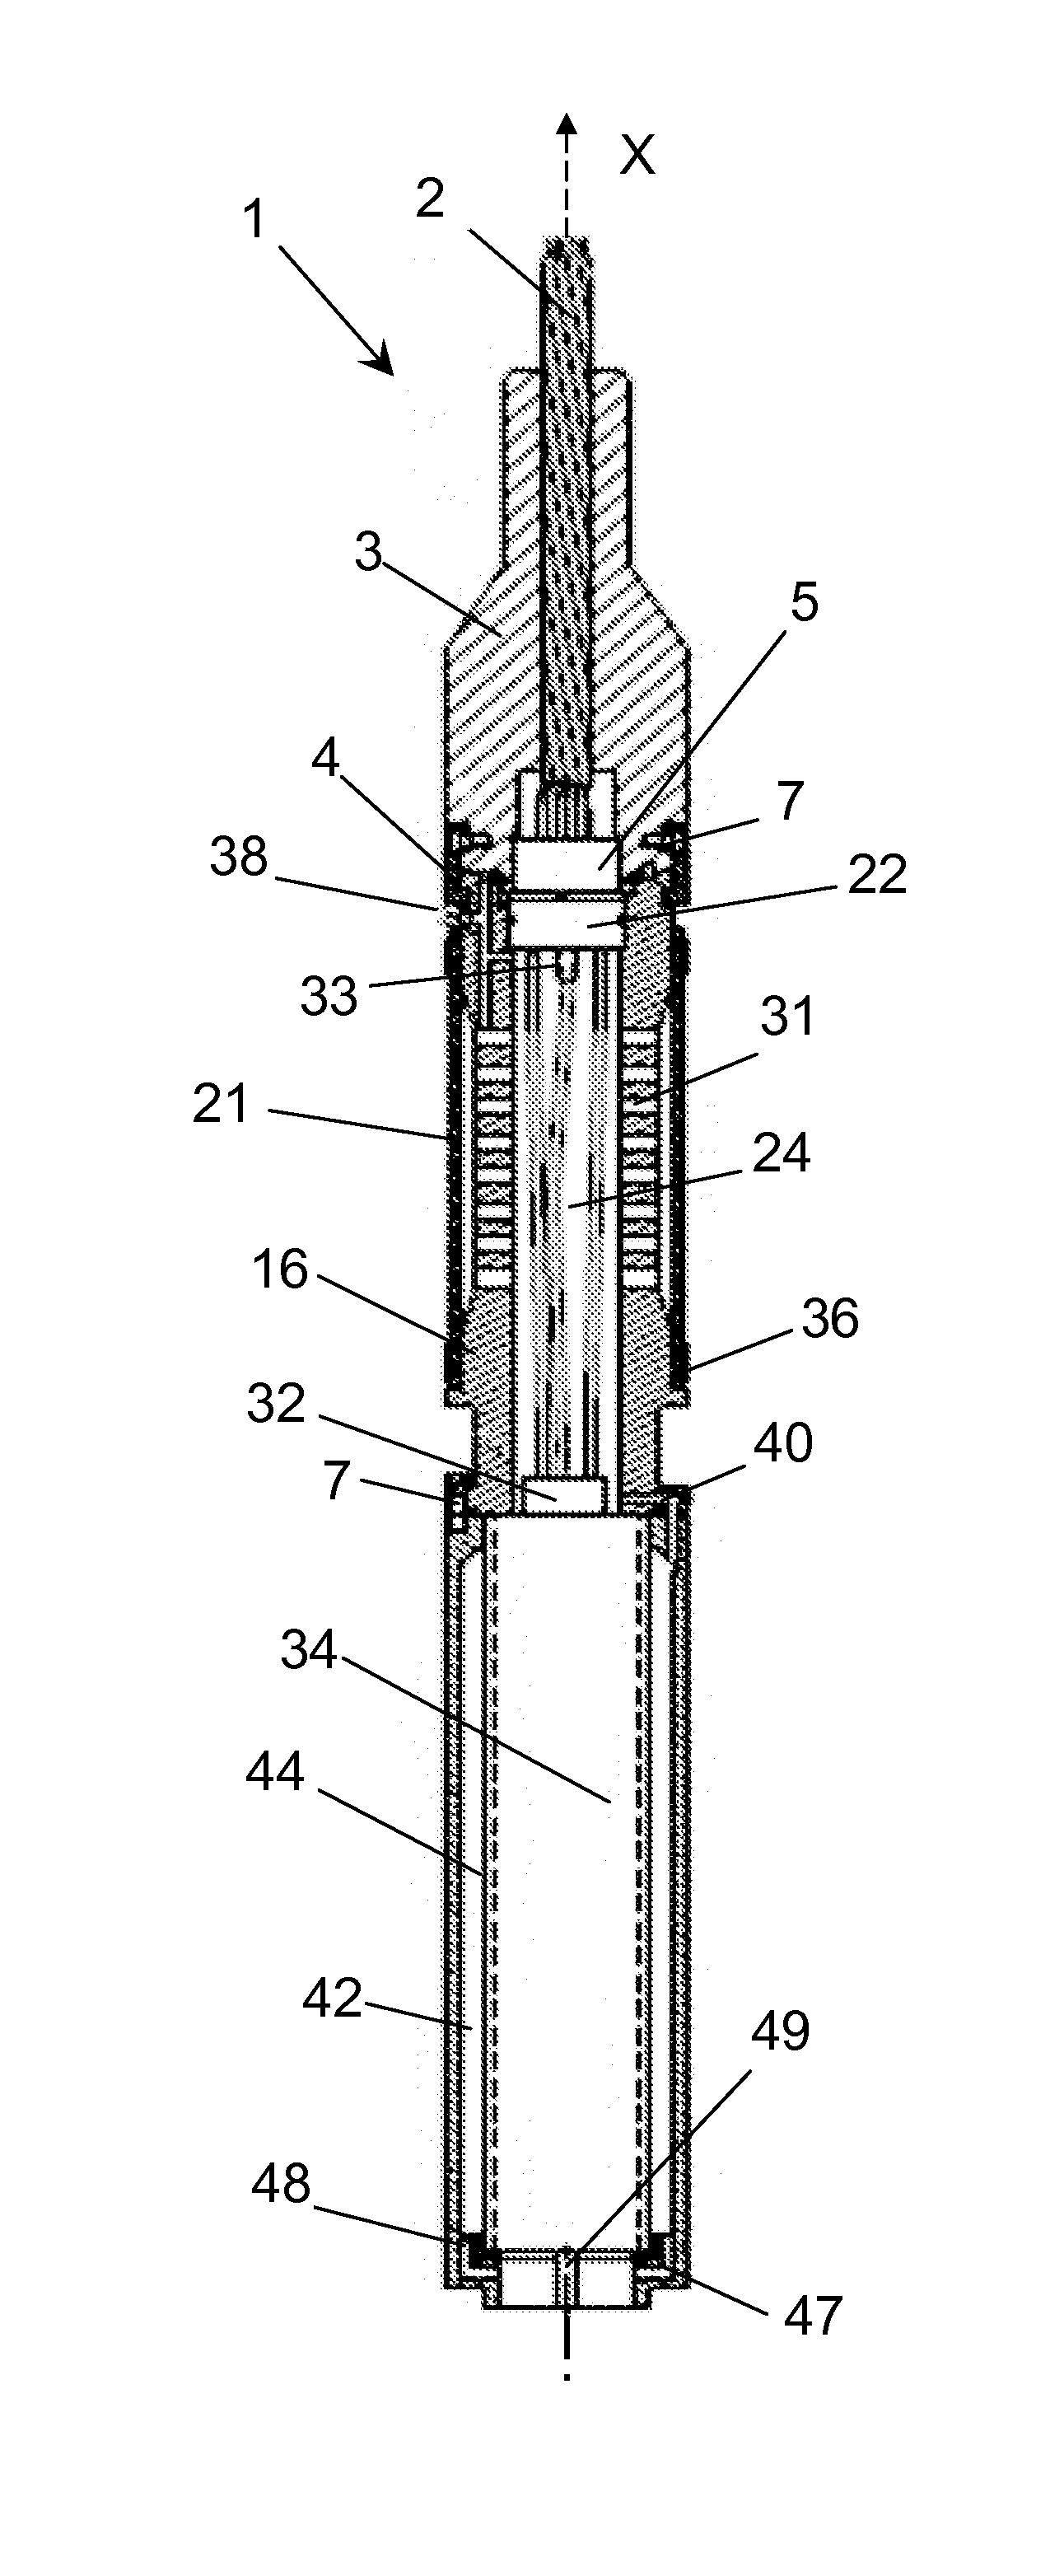 Method and apparatus for producing sound pulses within bore holes